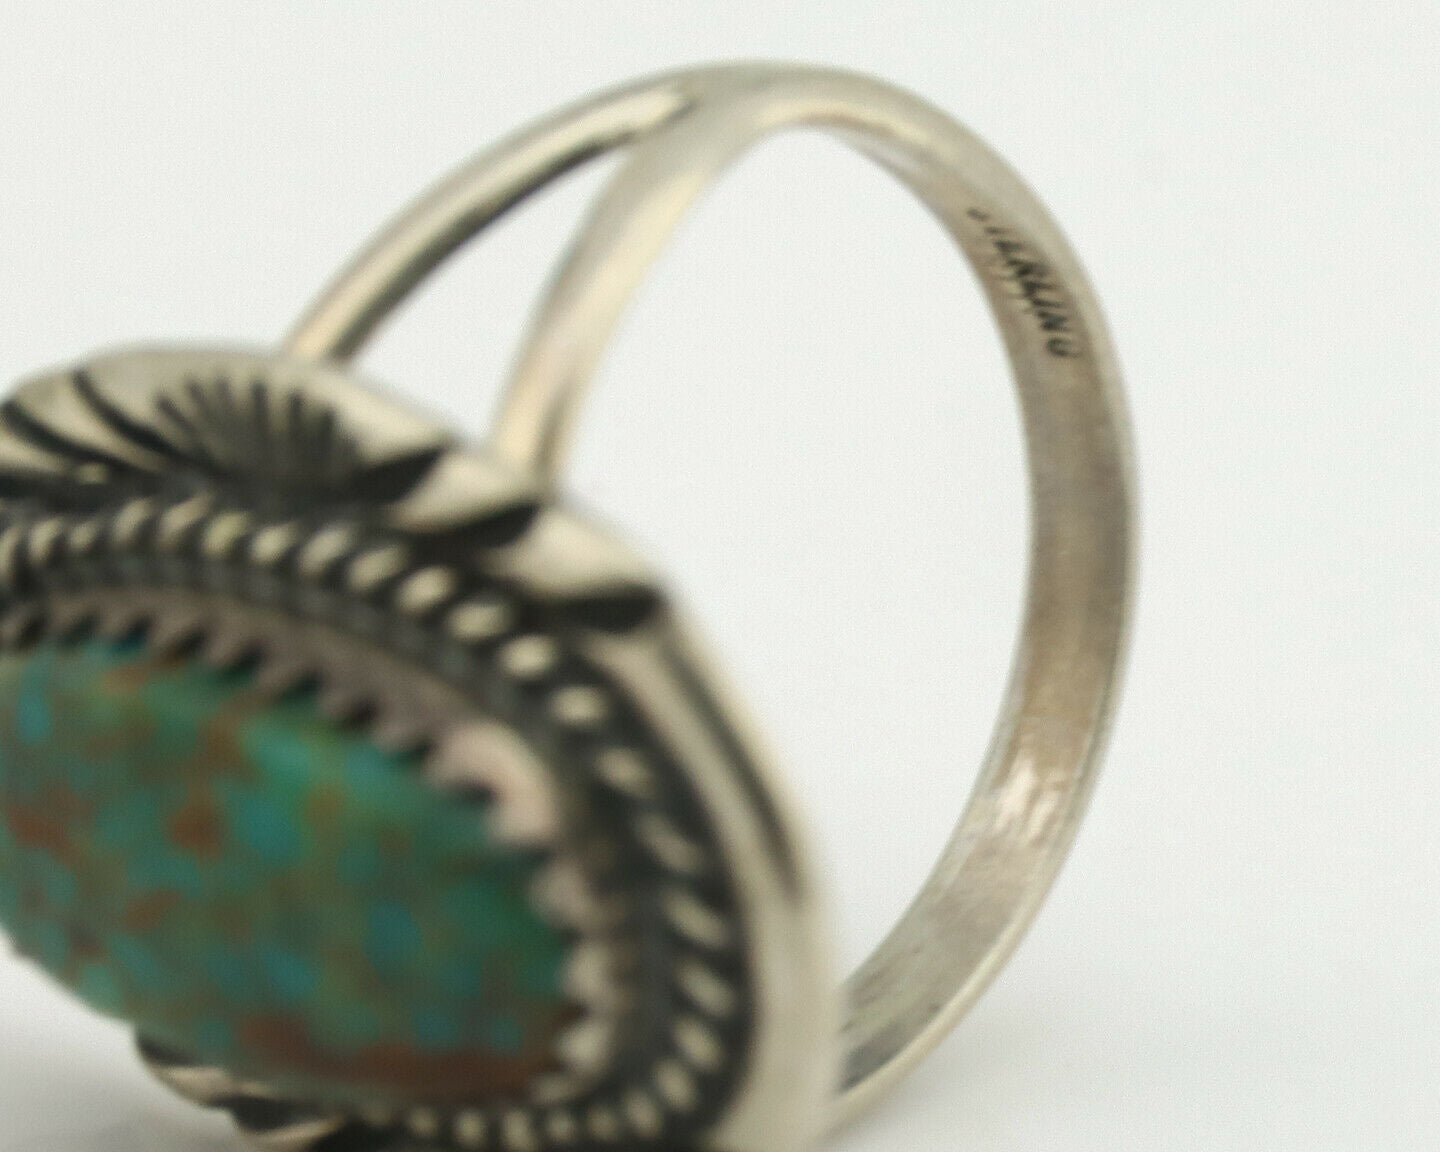 Navajo Ring .925 Silver Bisbee Turquoise Native American Artist C.1980's